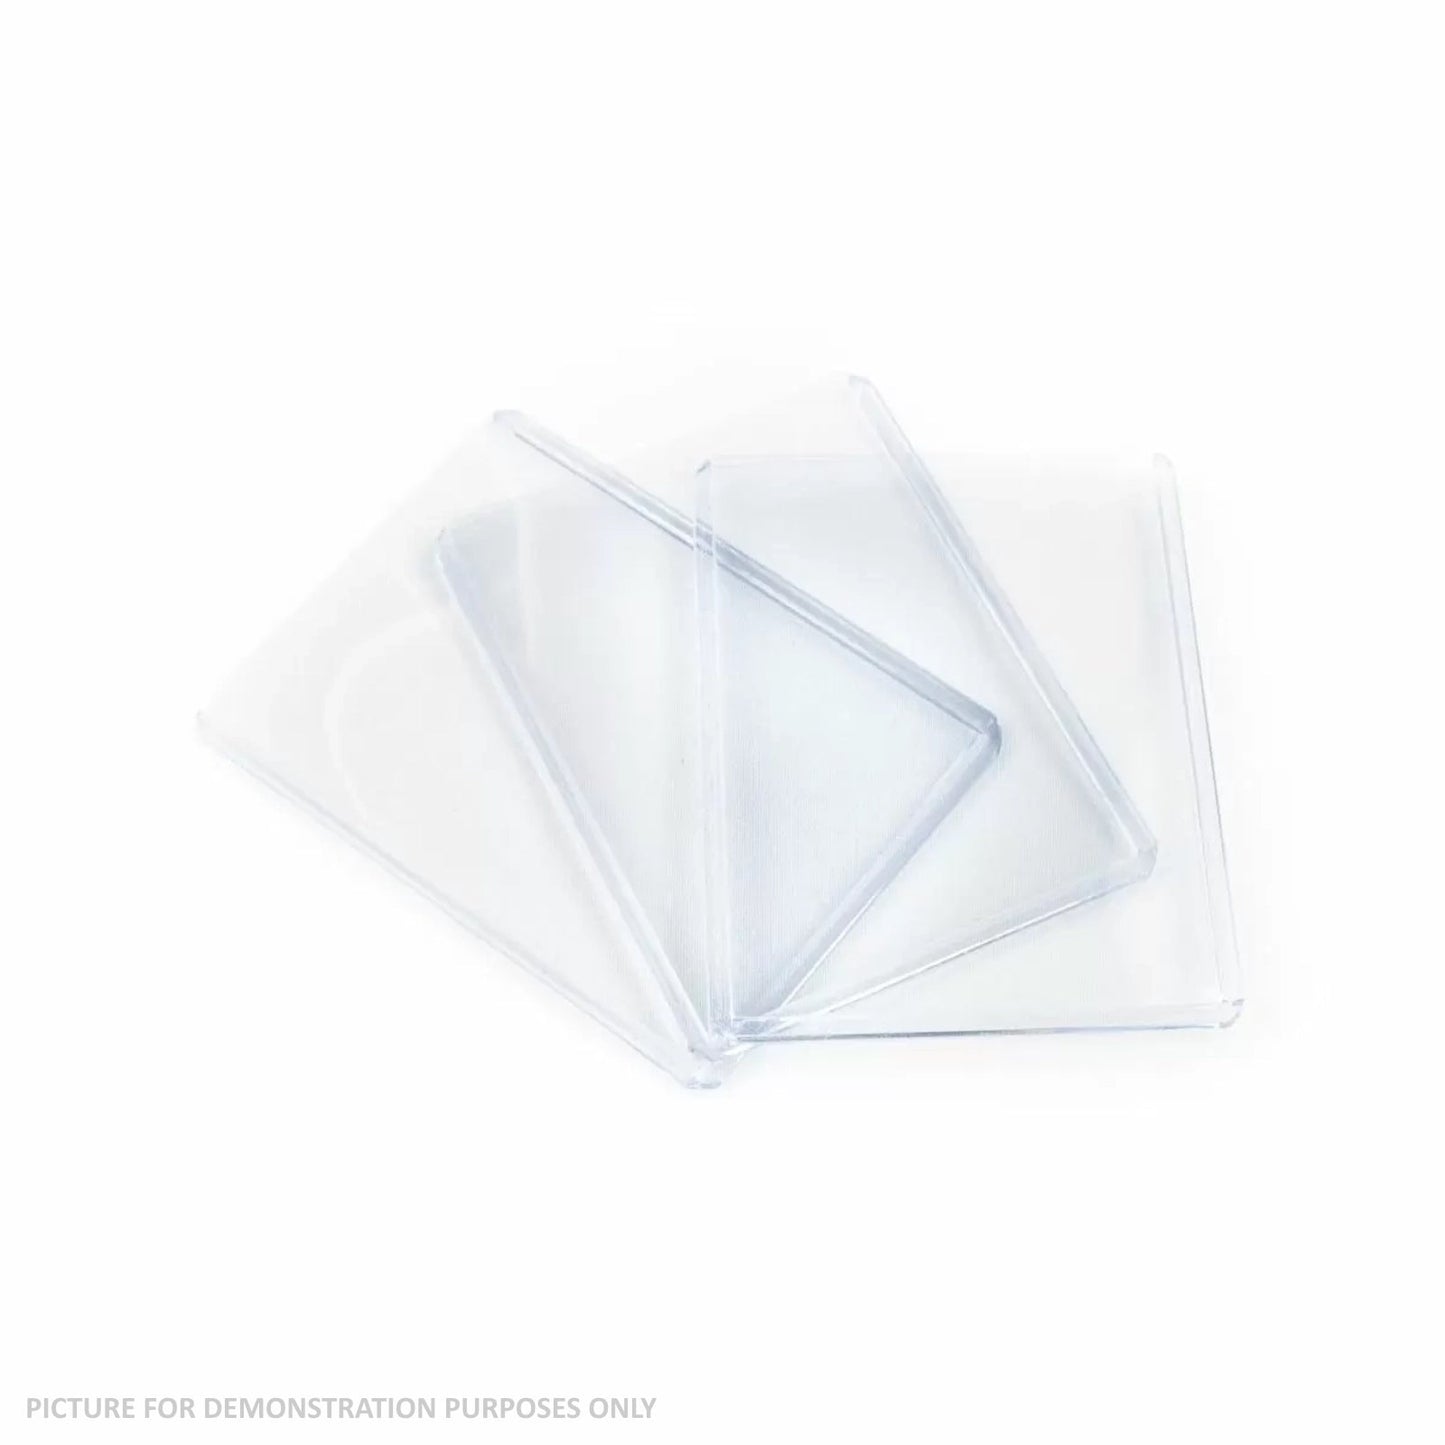 LPG 100pt Top Loaded Card Protector 3"x4" - PACK OF 25